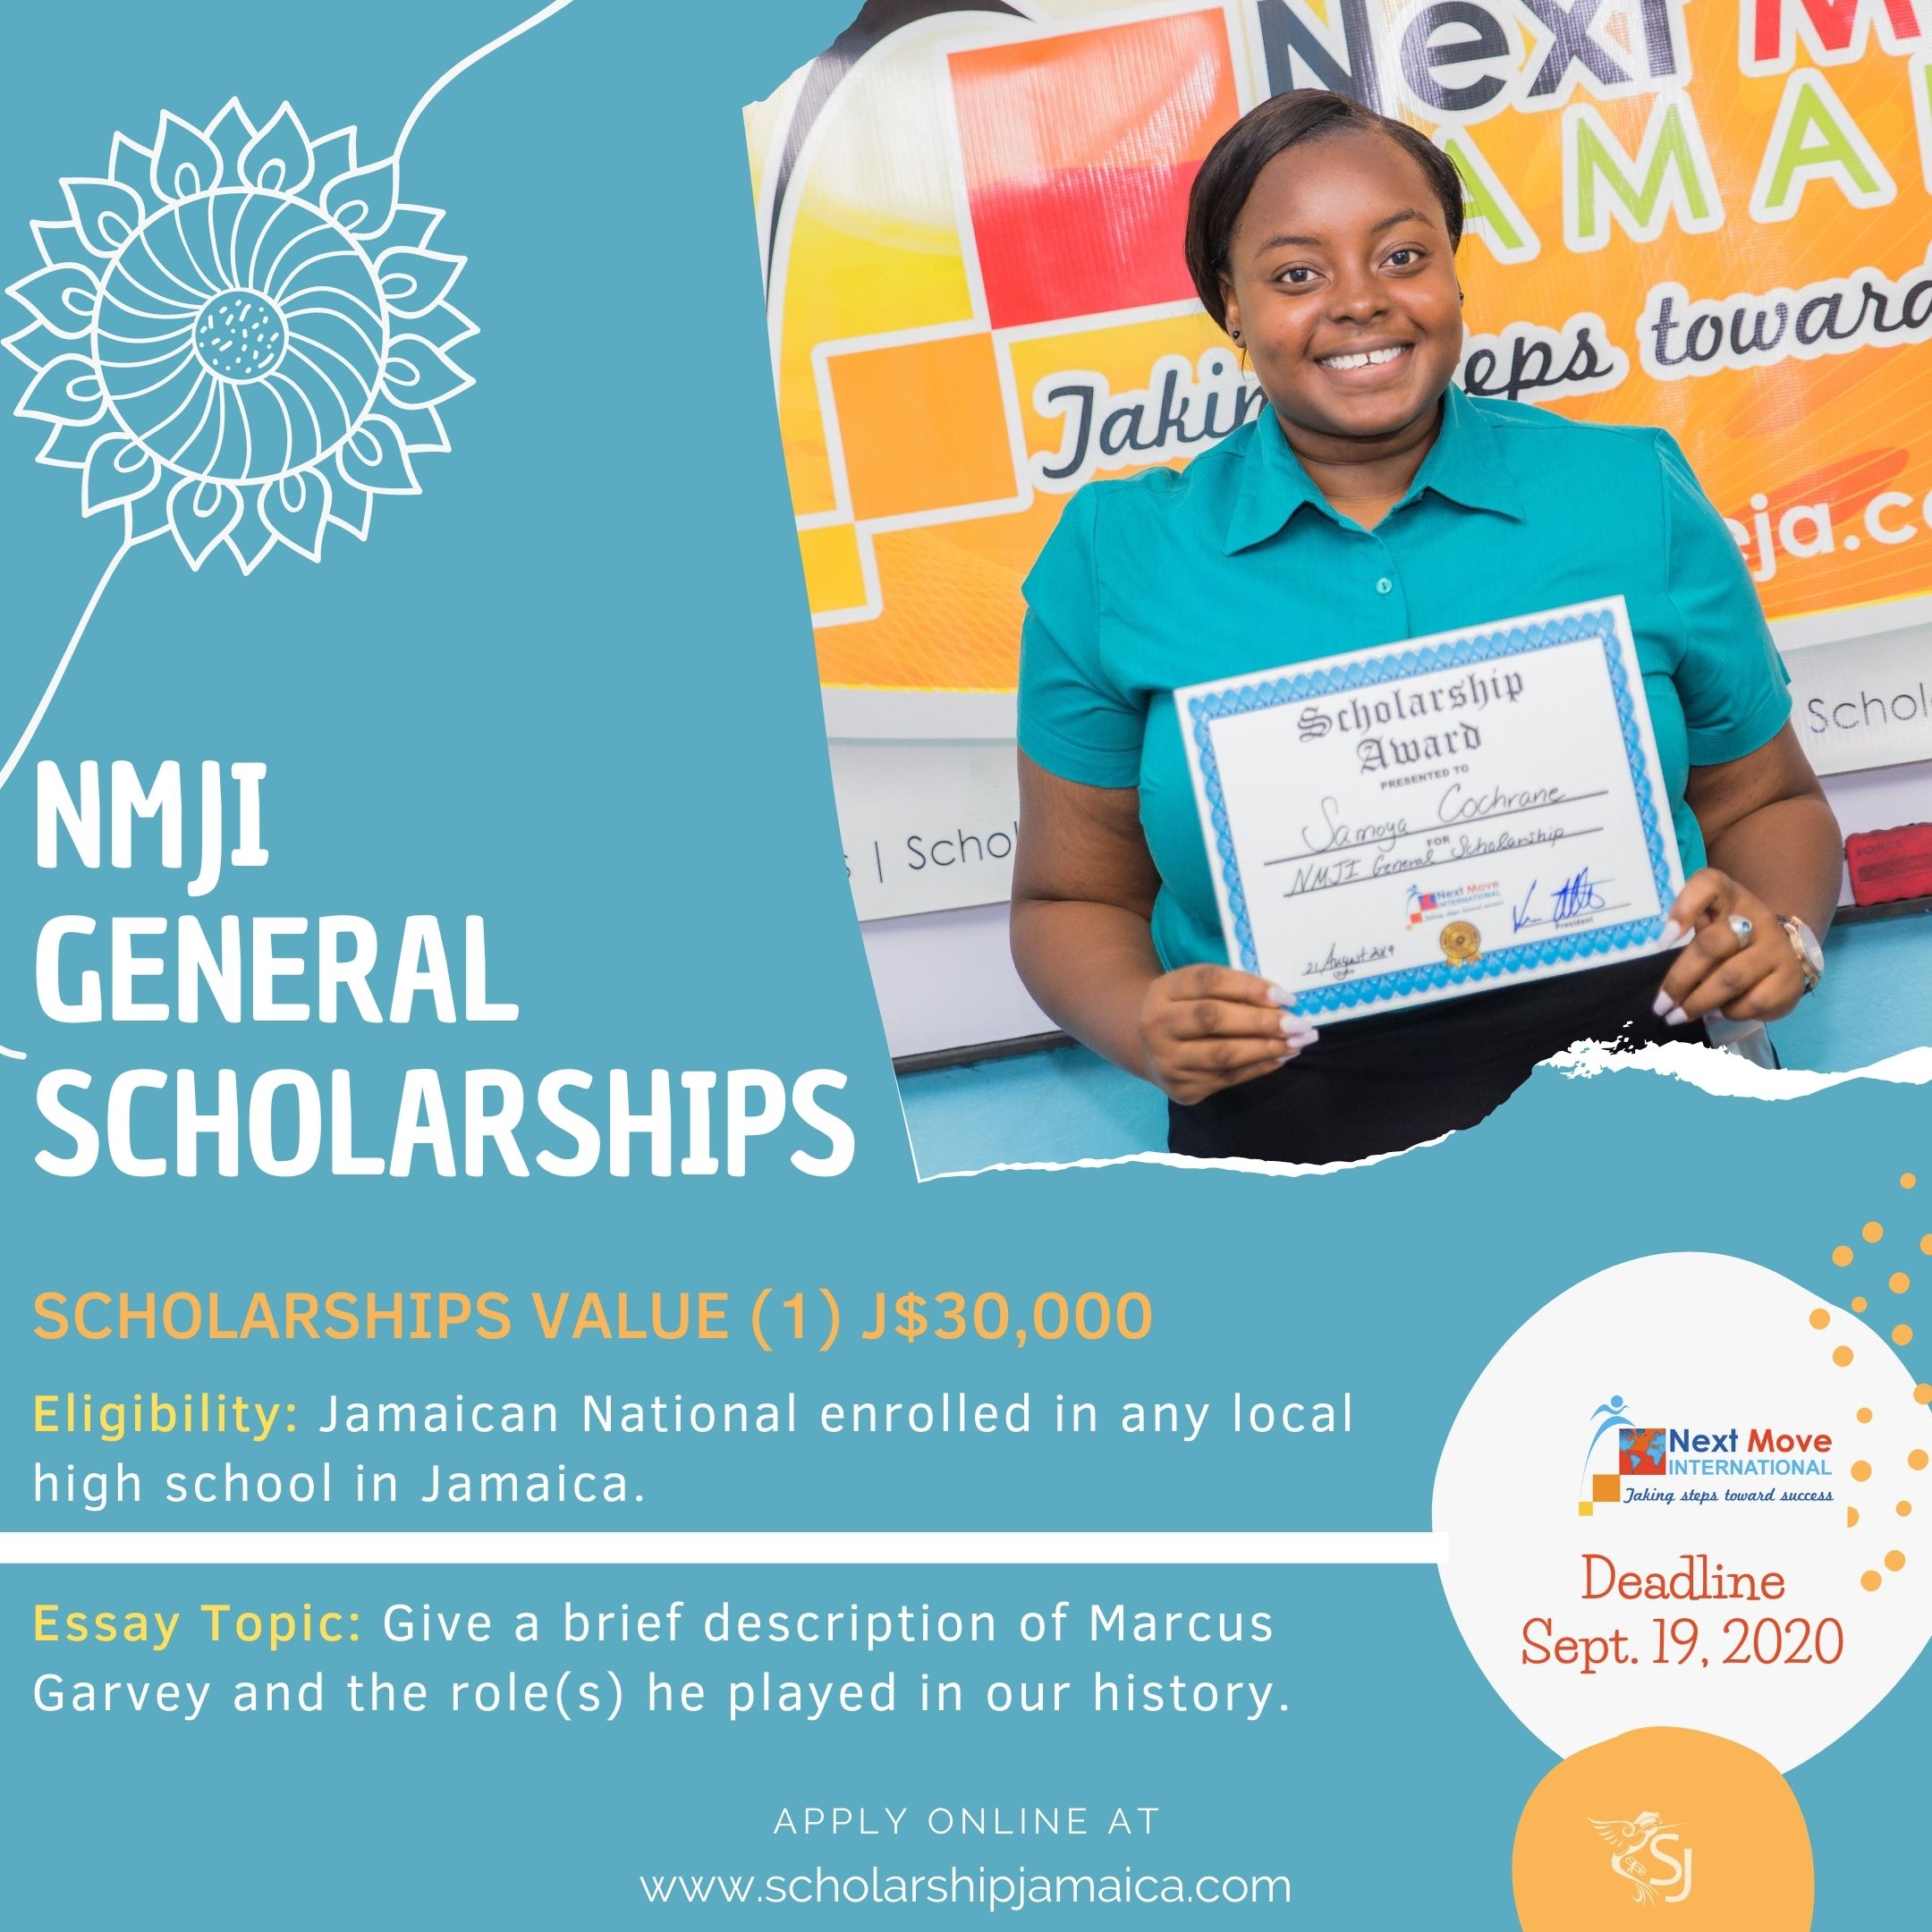 Apply for the Next Move Jamaica International (NMJI) General Scholarships for enrolled high school or community college students in Jamaica.